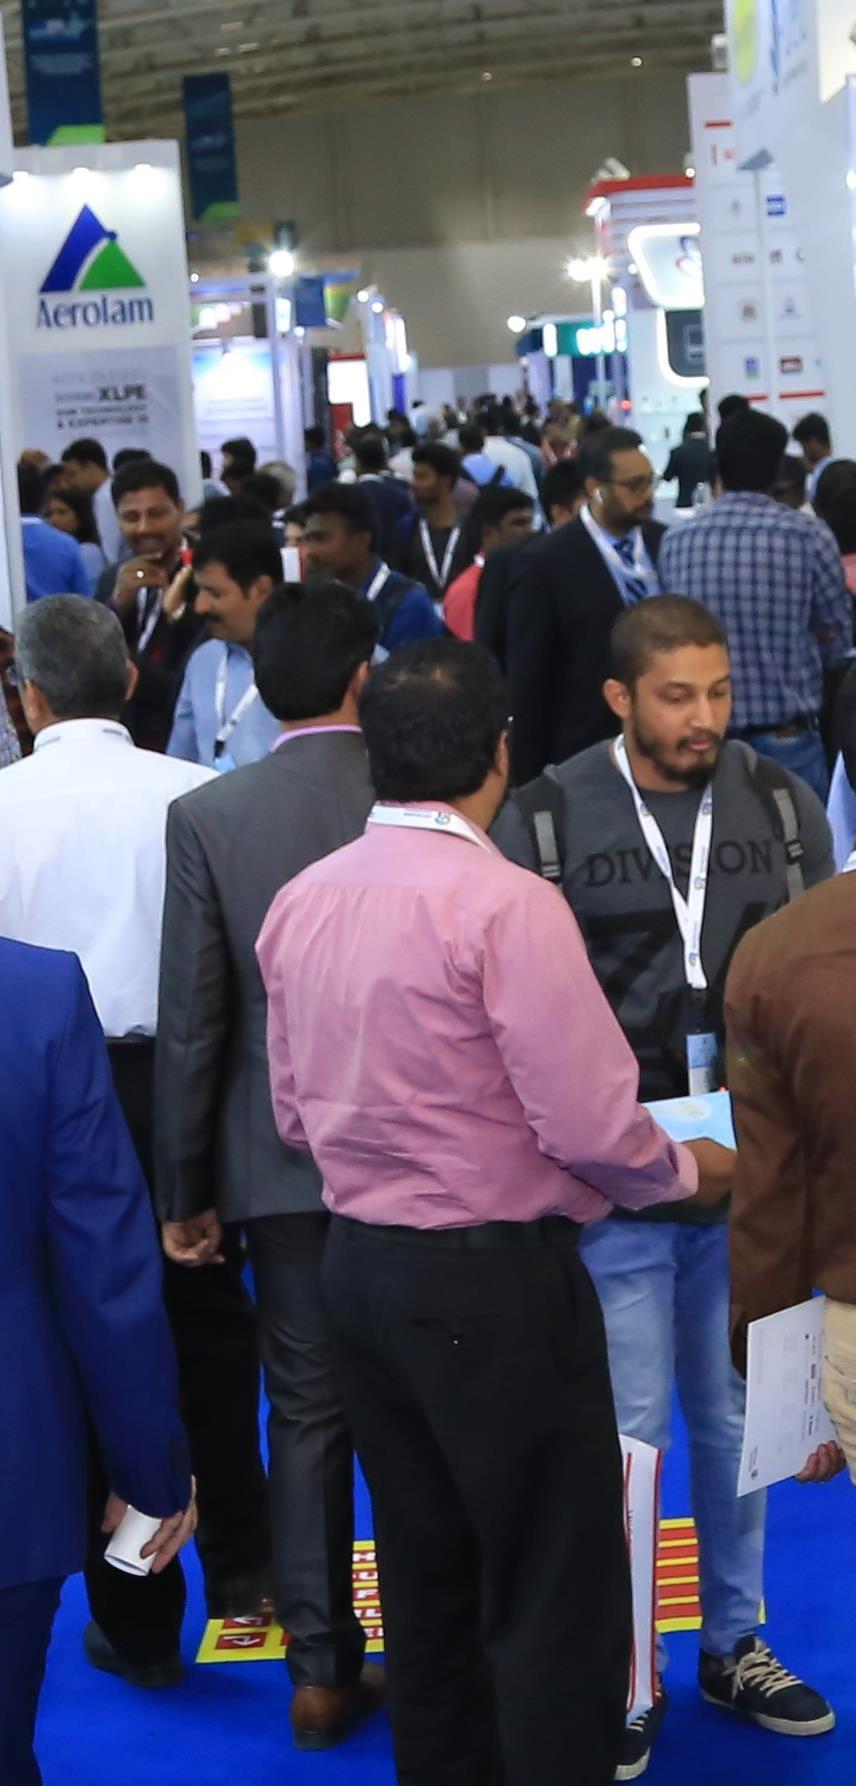 ACEX India 2018 in numbers 432 Exhibitors from 20 Countries ACREX India 2018 had individual participation from more than 20 countries: Czech republic, France, Hong Kong, Vietnam, Sweden, Brazil,